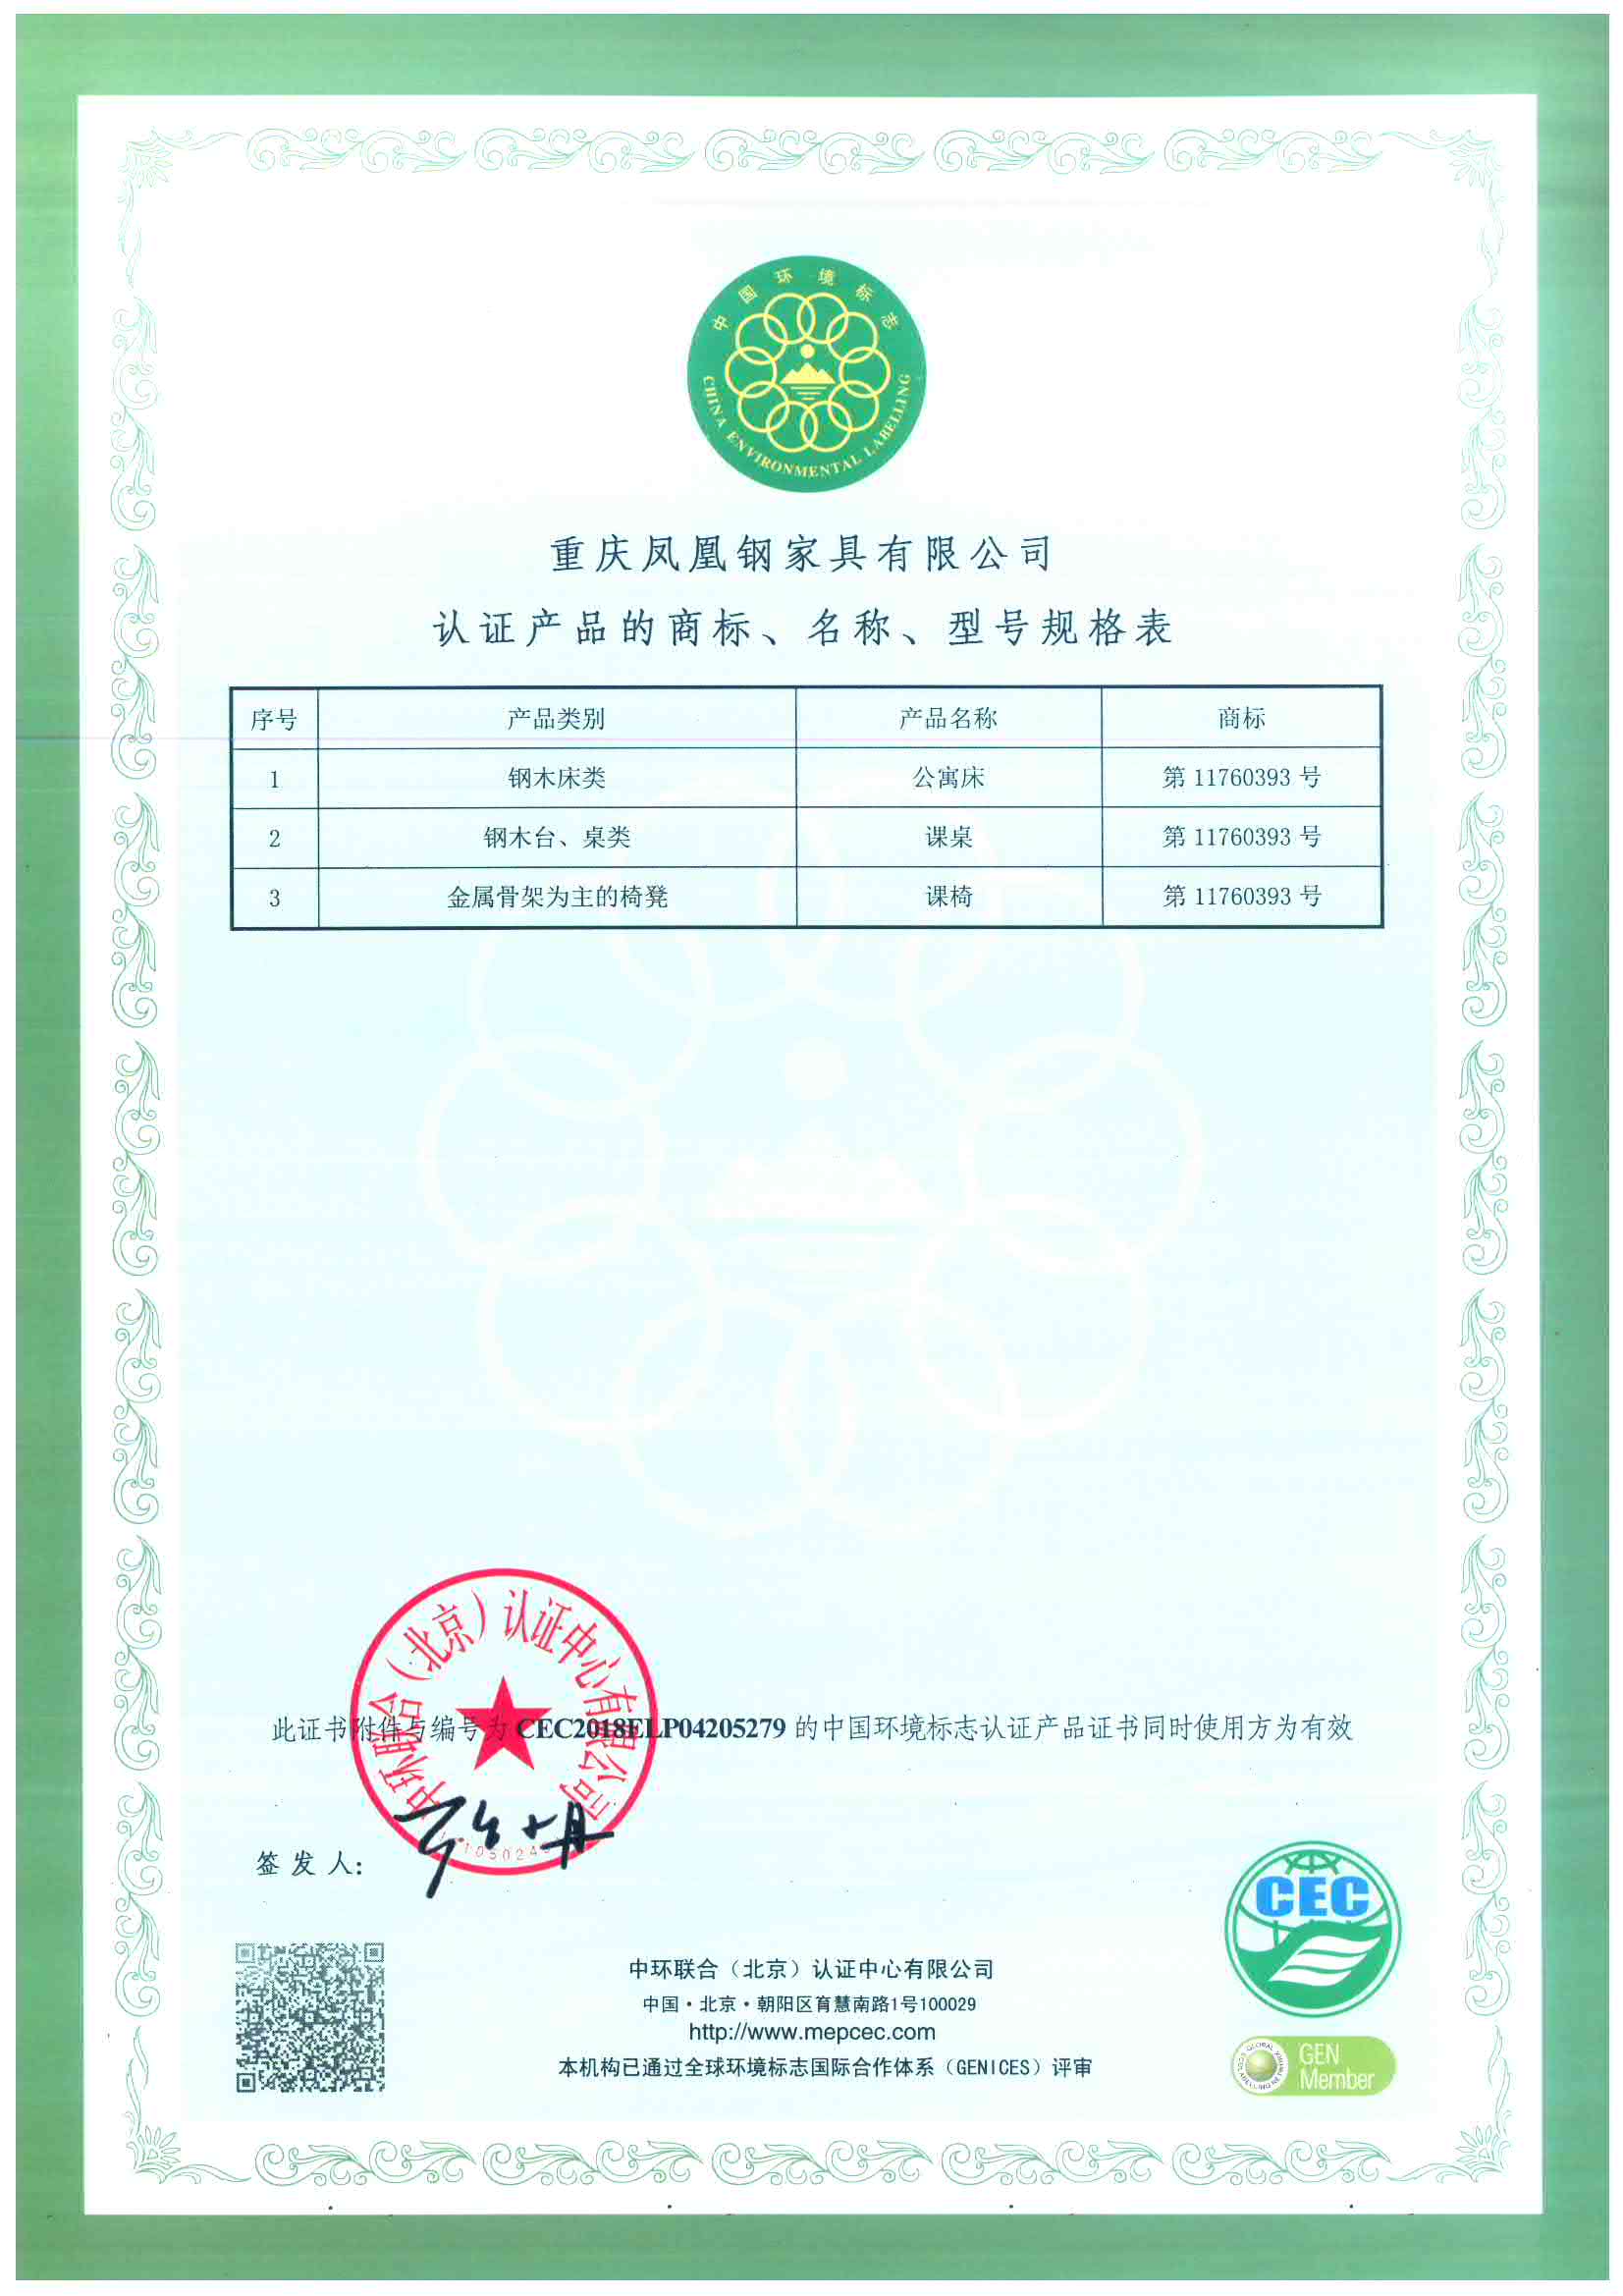 China Environmental Labeling Product Certification